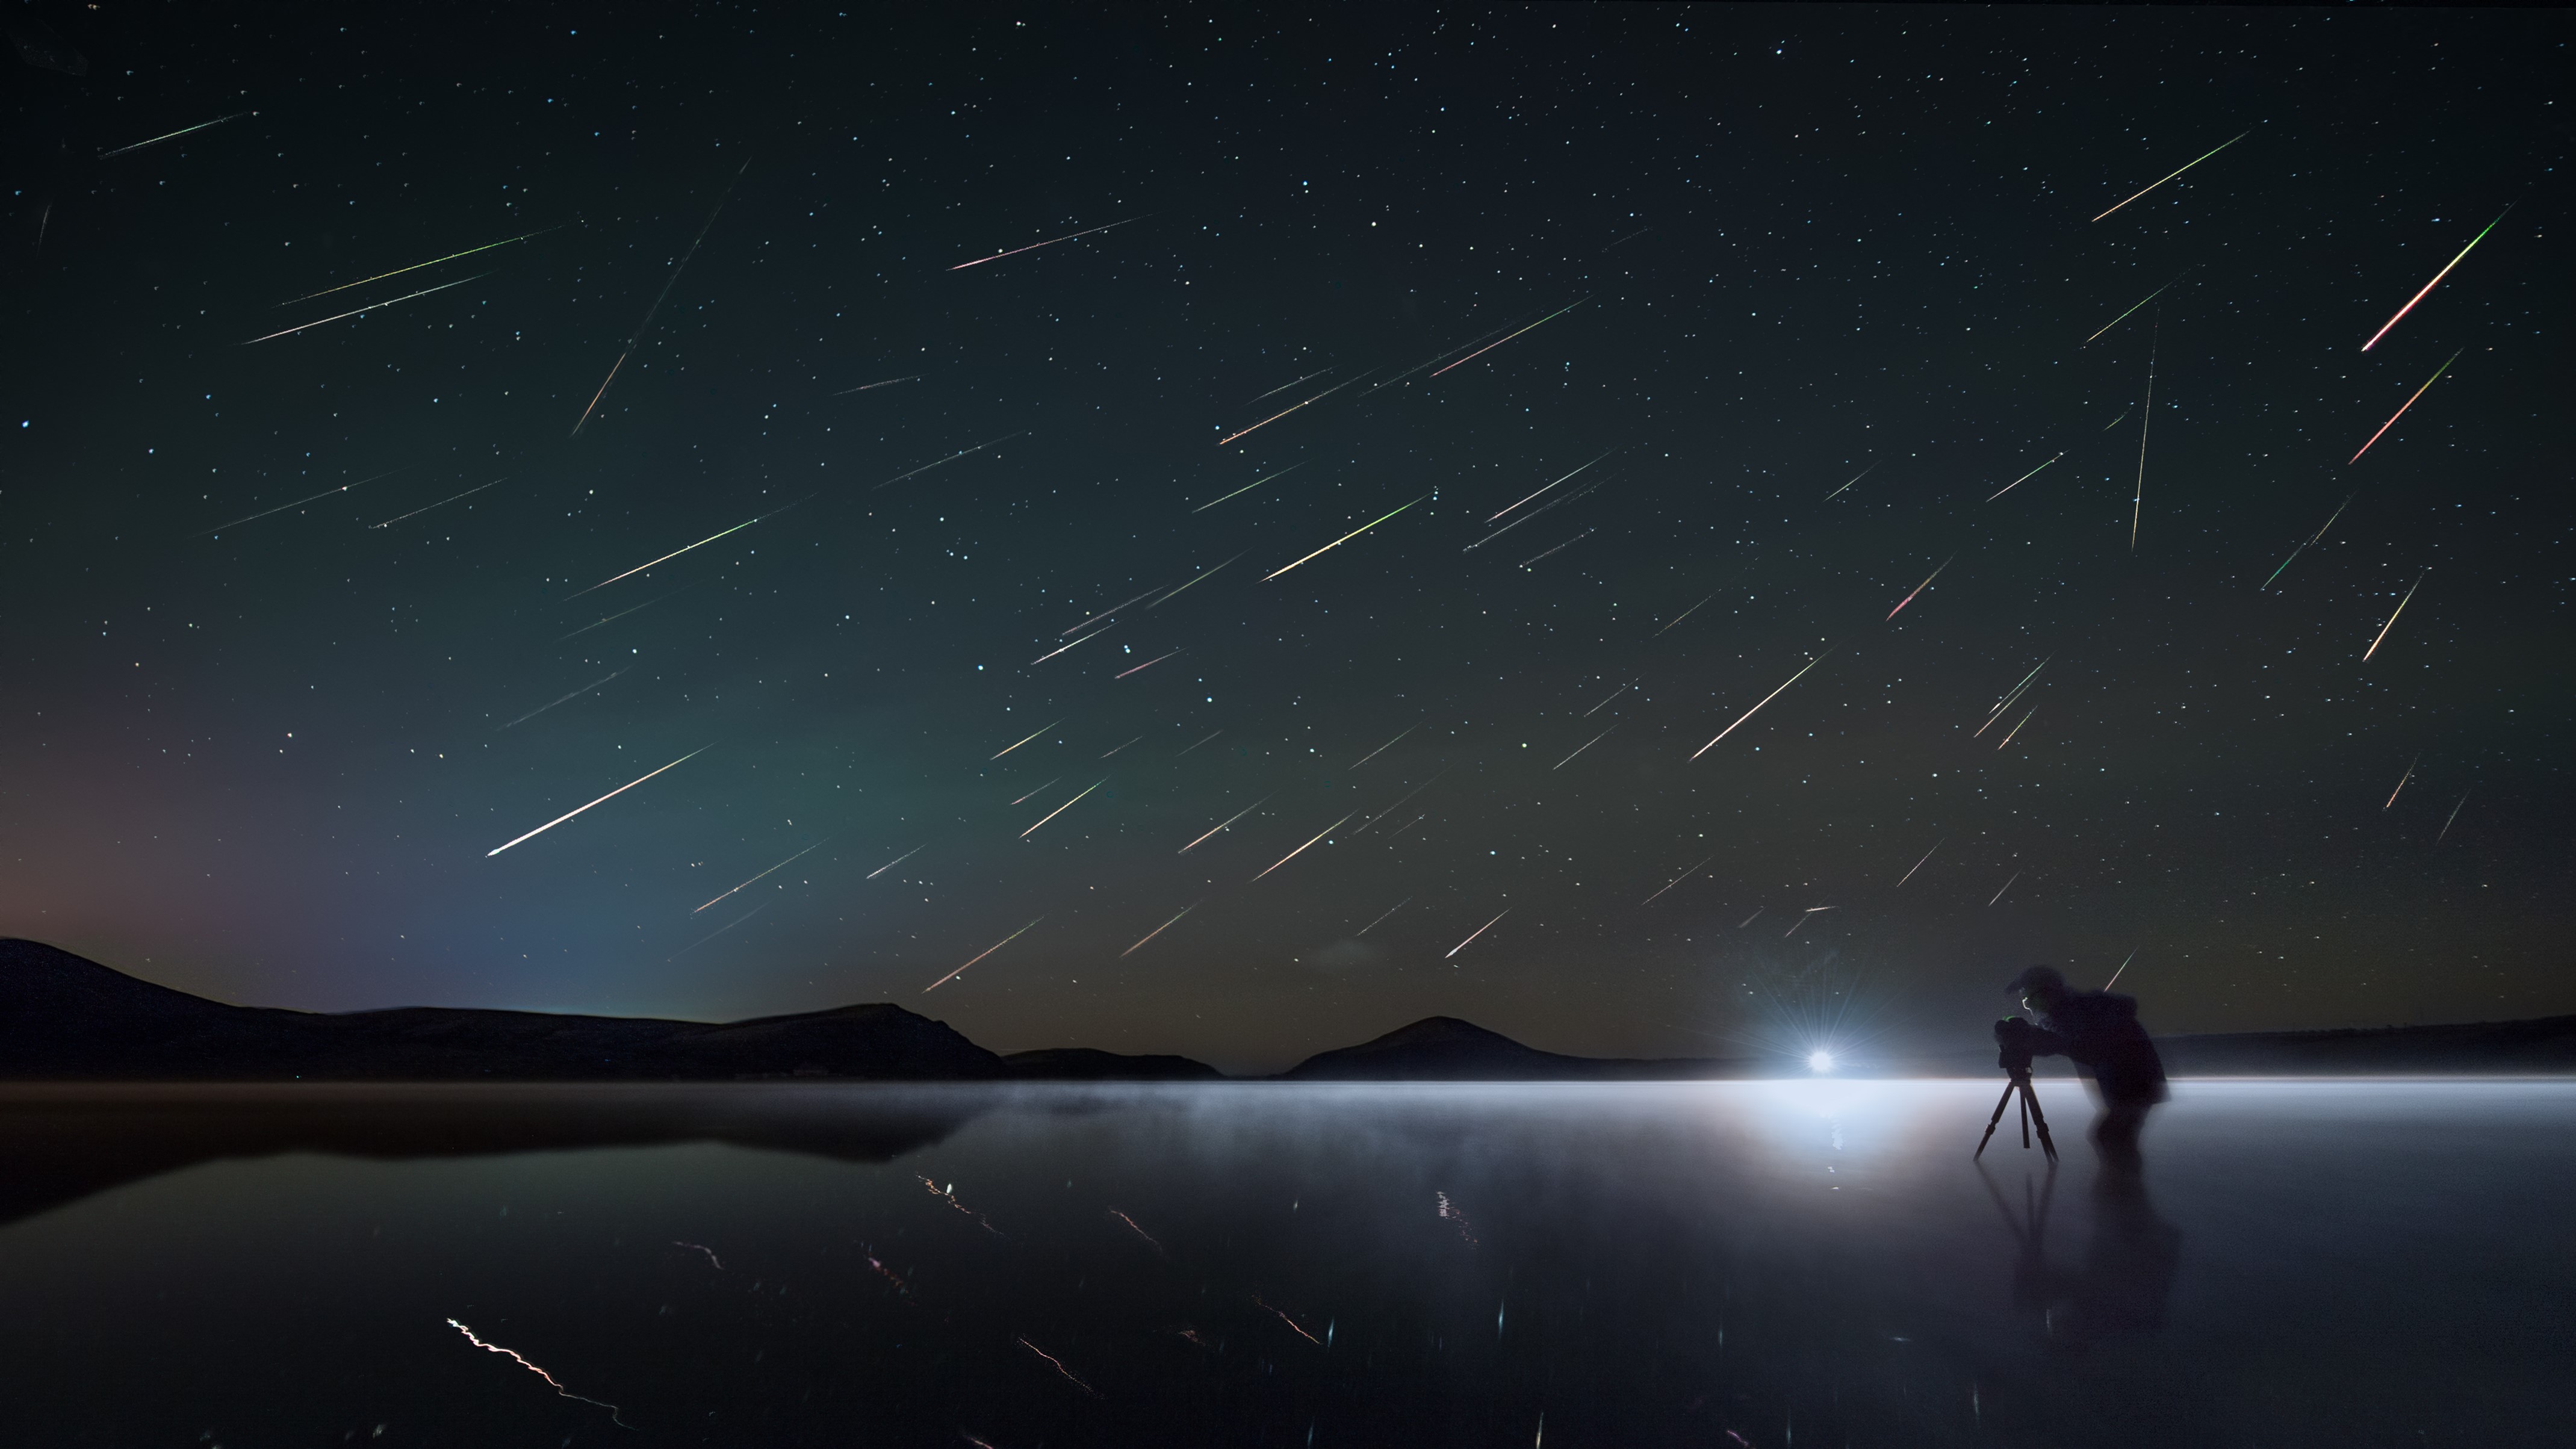 Meteor Shower Schedule 2022 Perseid Meteor Shower 2022: When, Where & How To See It | Space